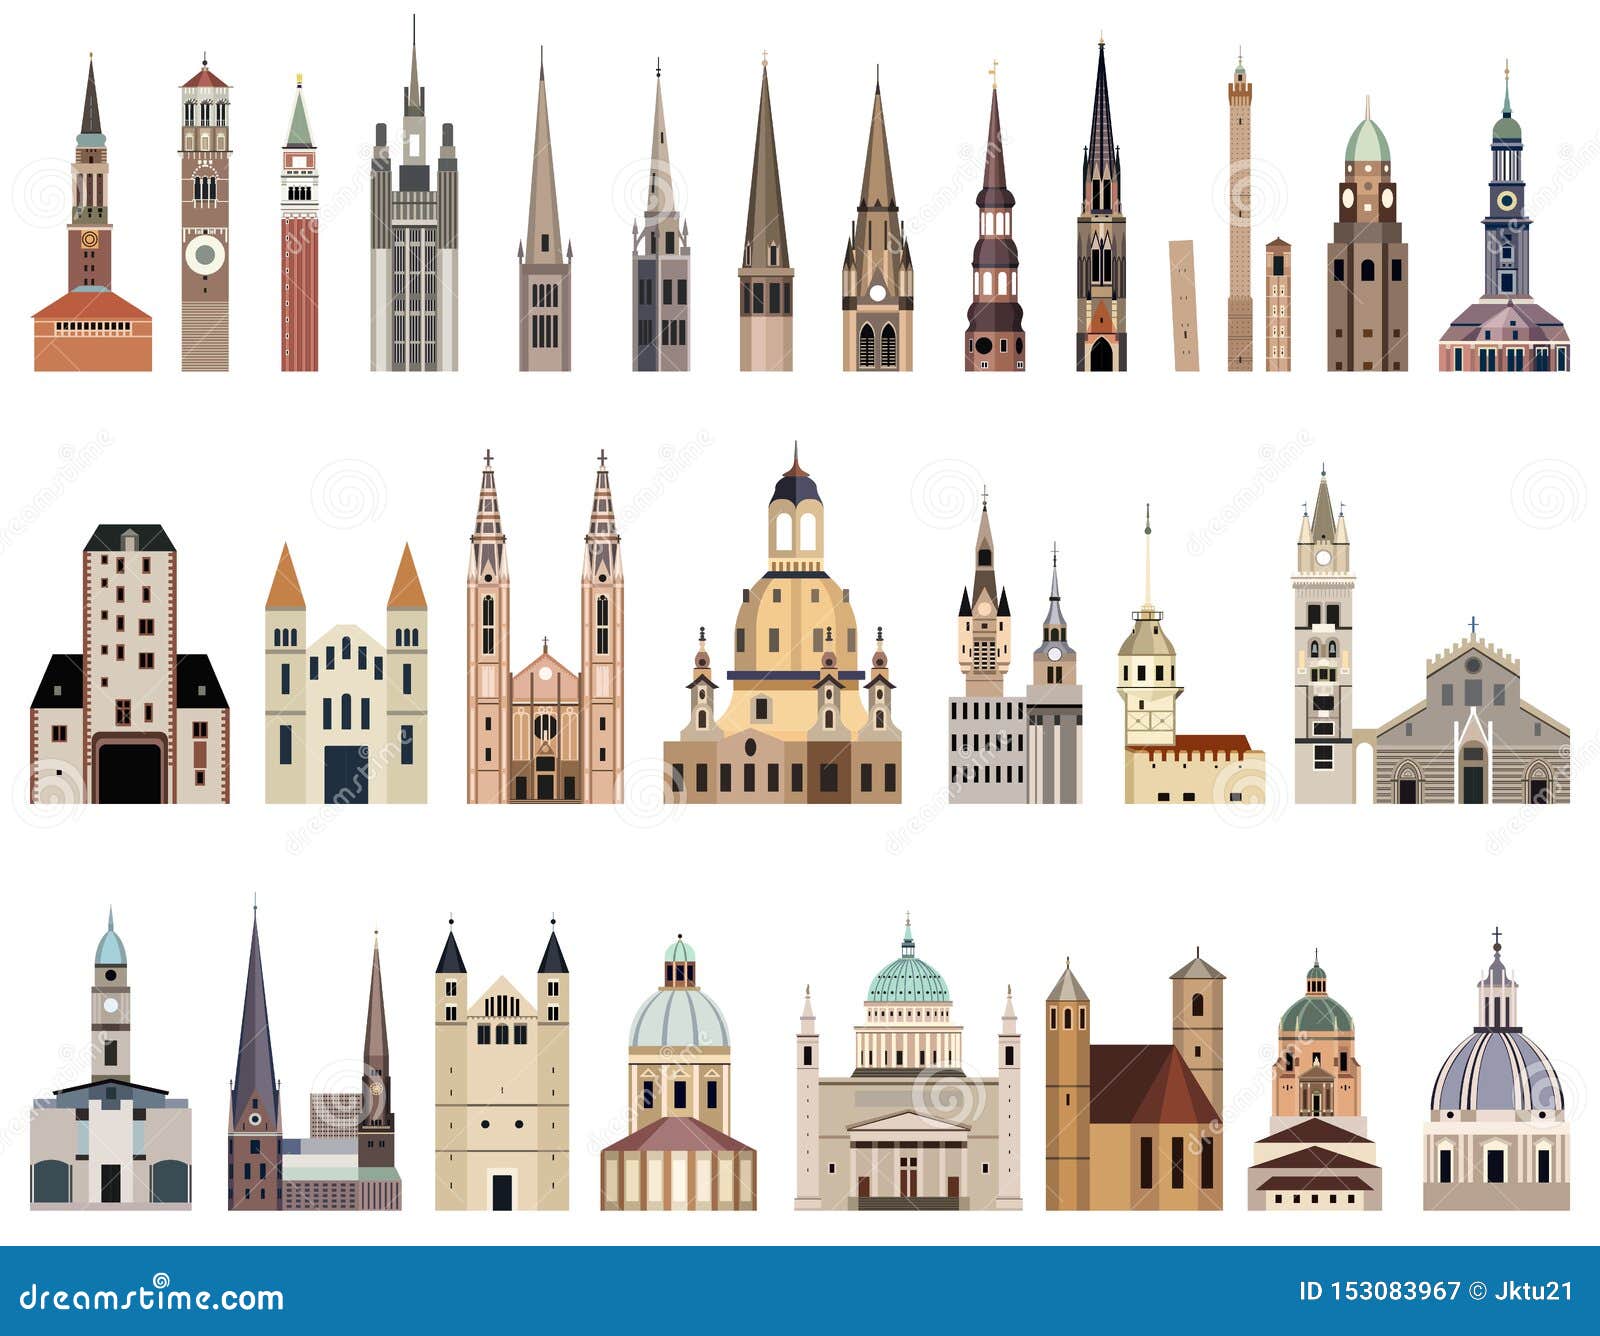  collection of high detailed  city halls, landmarks, cathedrals, temples, churches, palaces